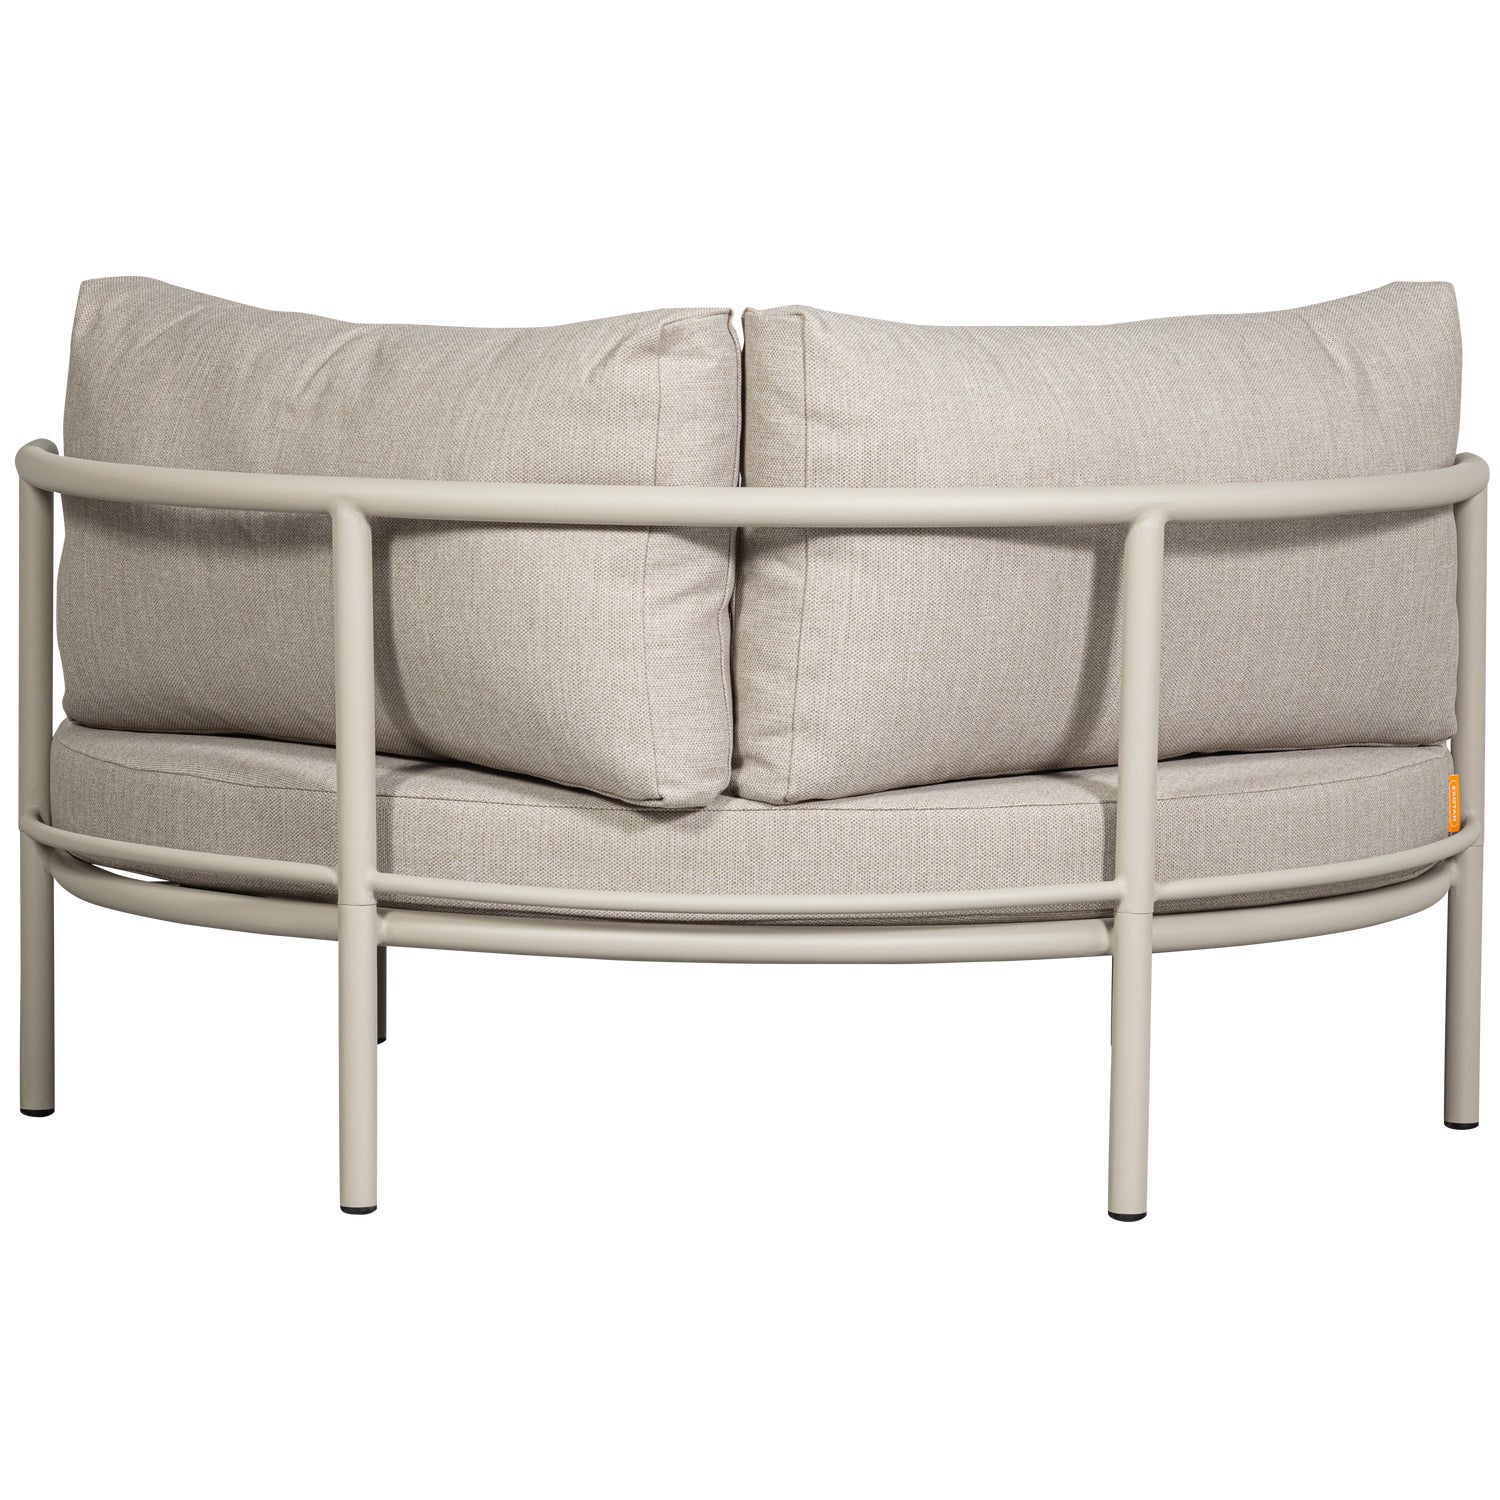 500015-Z-03_VS_EXT_Mulberry_rond_loungebed_aluminium_zand_AK1.png?auto=webp&format=png&width=1500&height=1500